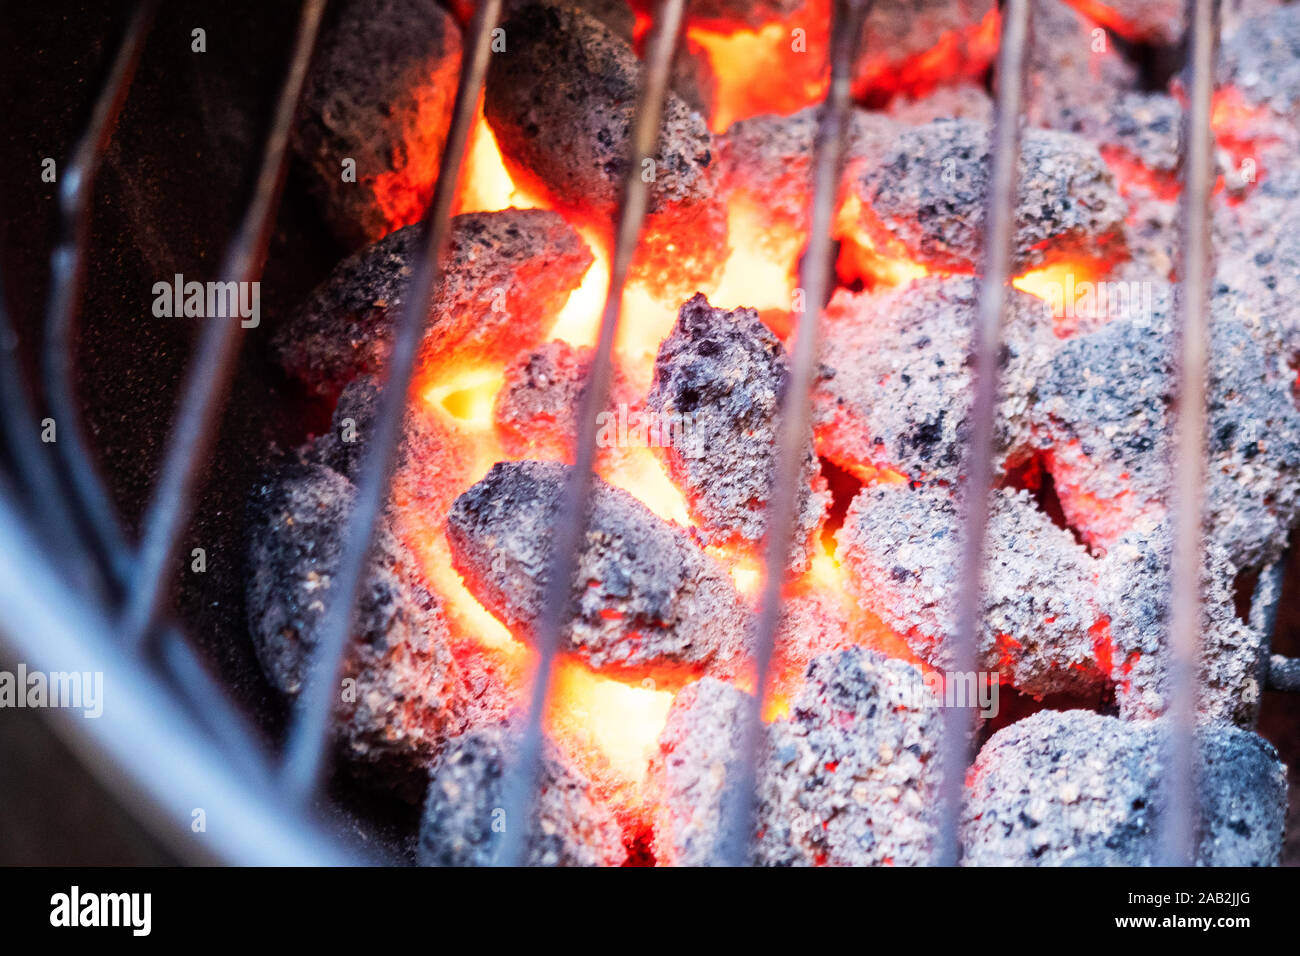 Hot charcoal coals burning red in a bbq in Adelaide South Australia on 25th November 2019 Stock Photo